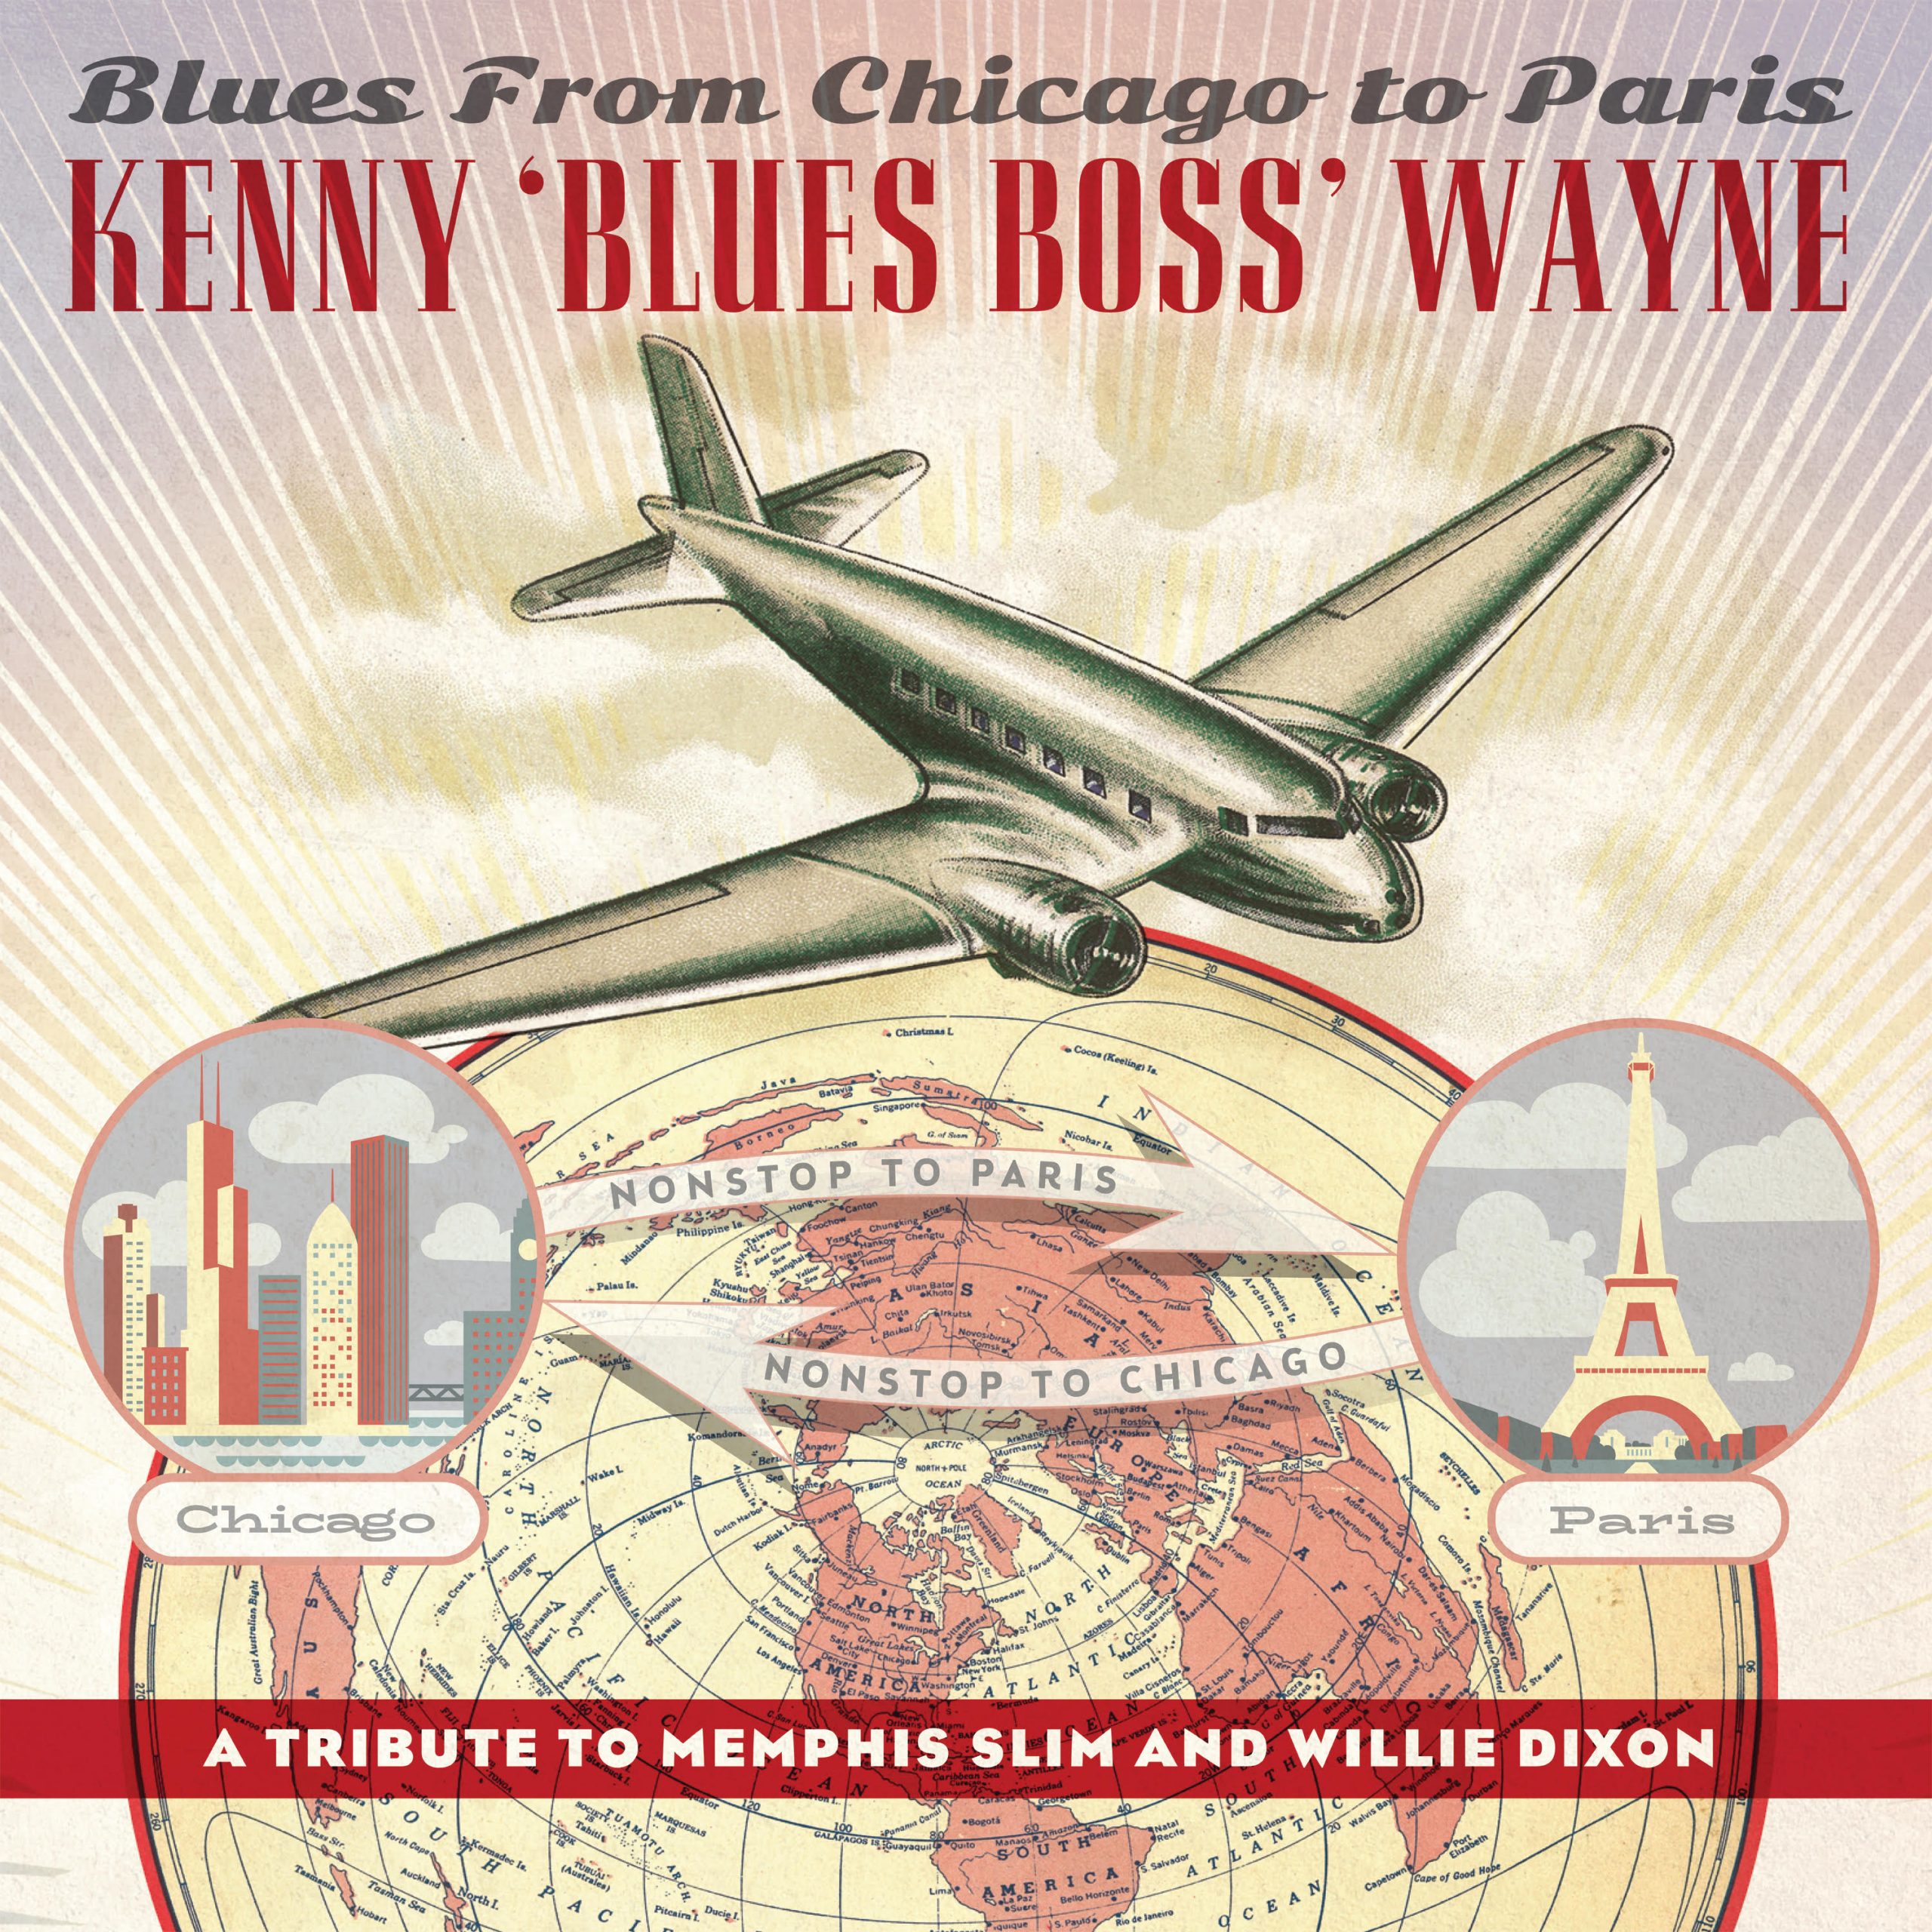 Kenny "Blues Boss" Wayne pays tribute to Memphis Slim & Willie Dixon with his new album, "Blues From Chicago to Paris"